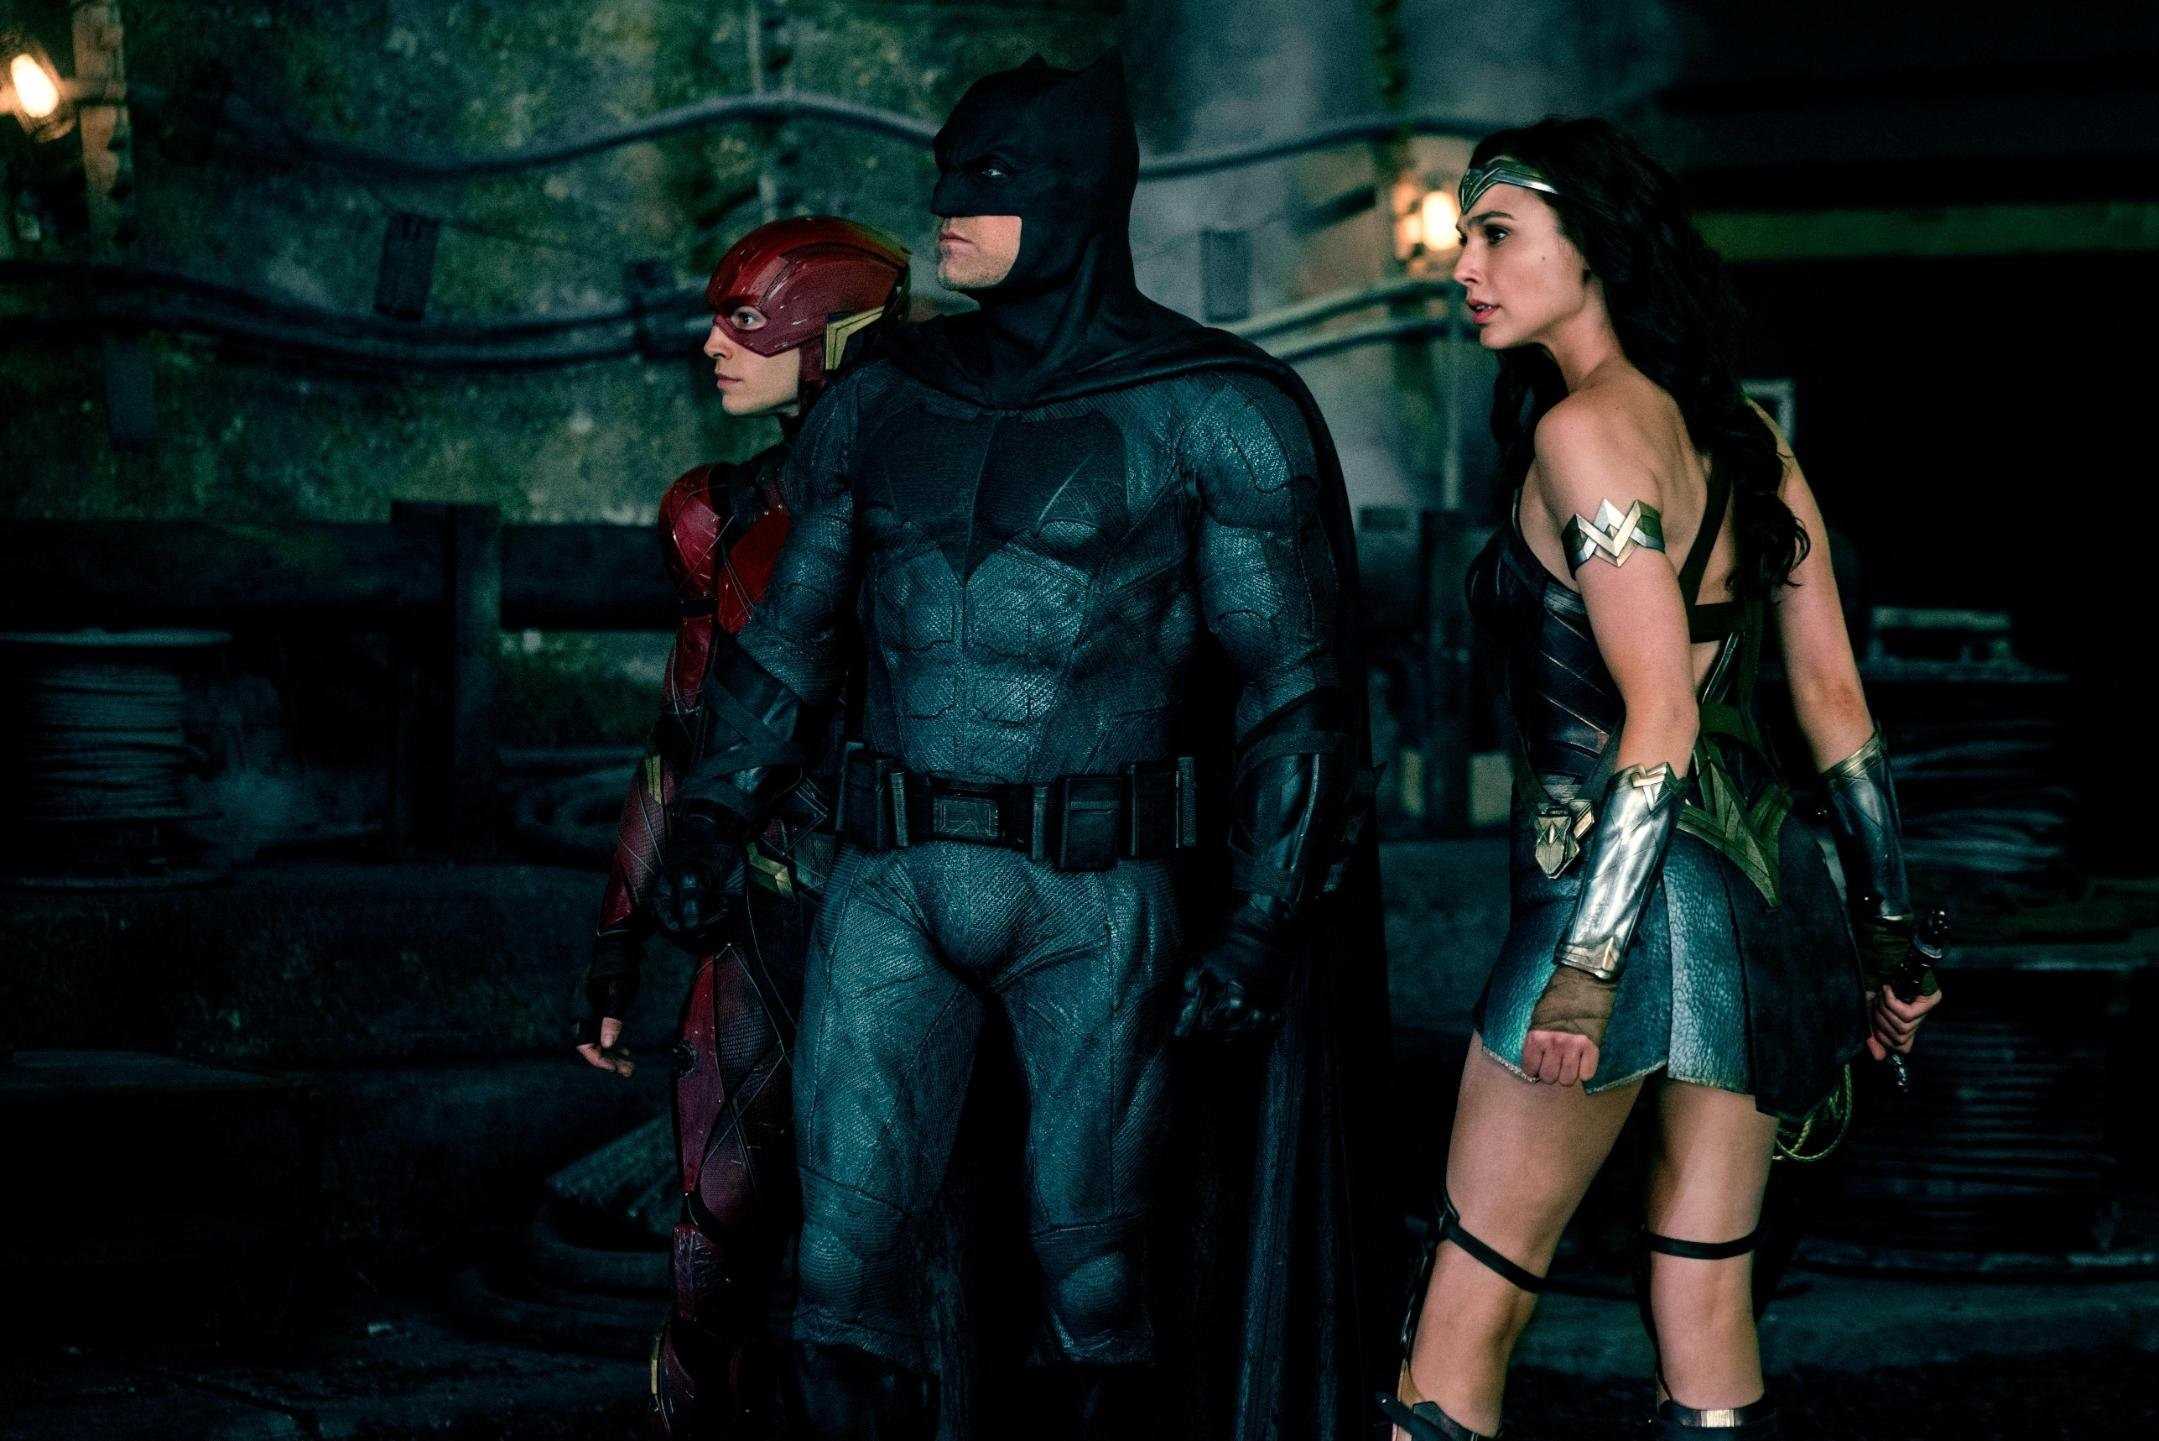 'Justice League' disappoints with $96 million debut